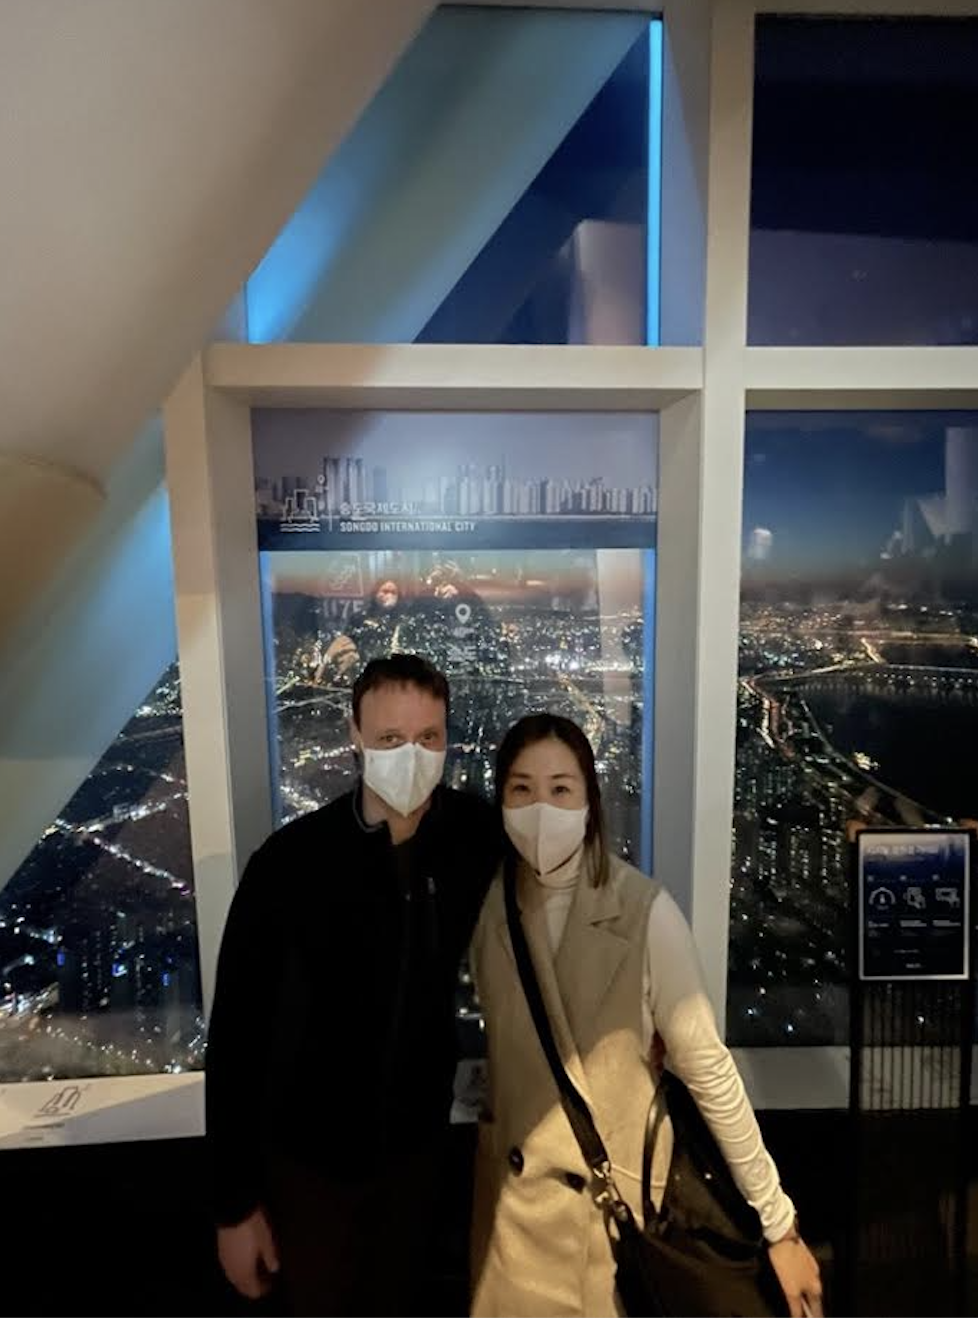 At Seoul Sky, Lotte World Tower, Mrs. Je and her husband capture a memory before her son was born. The couple glances at the view of Seoul from the tower. Photo courtesy of Mrs. Je.